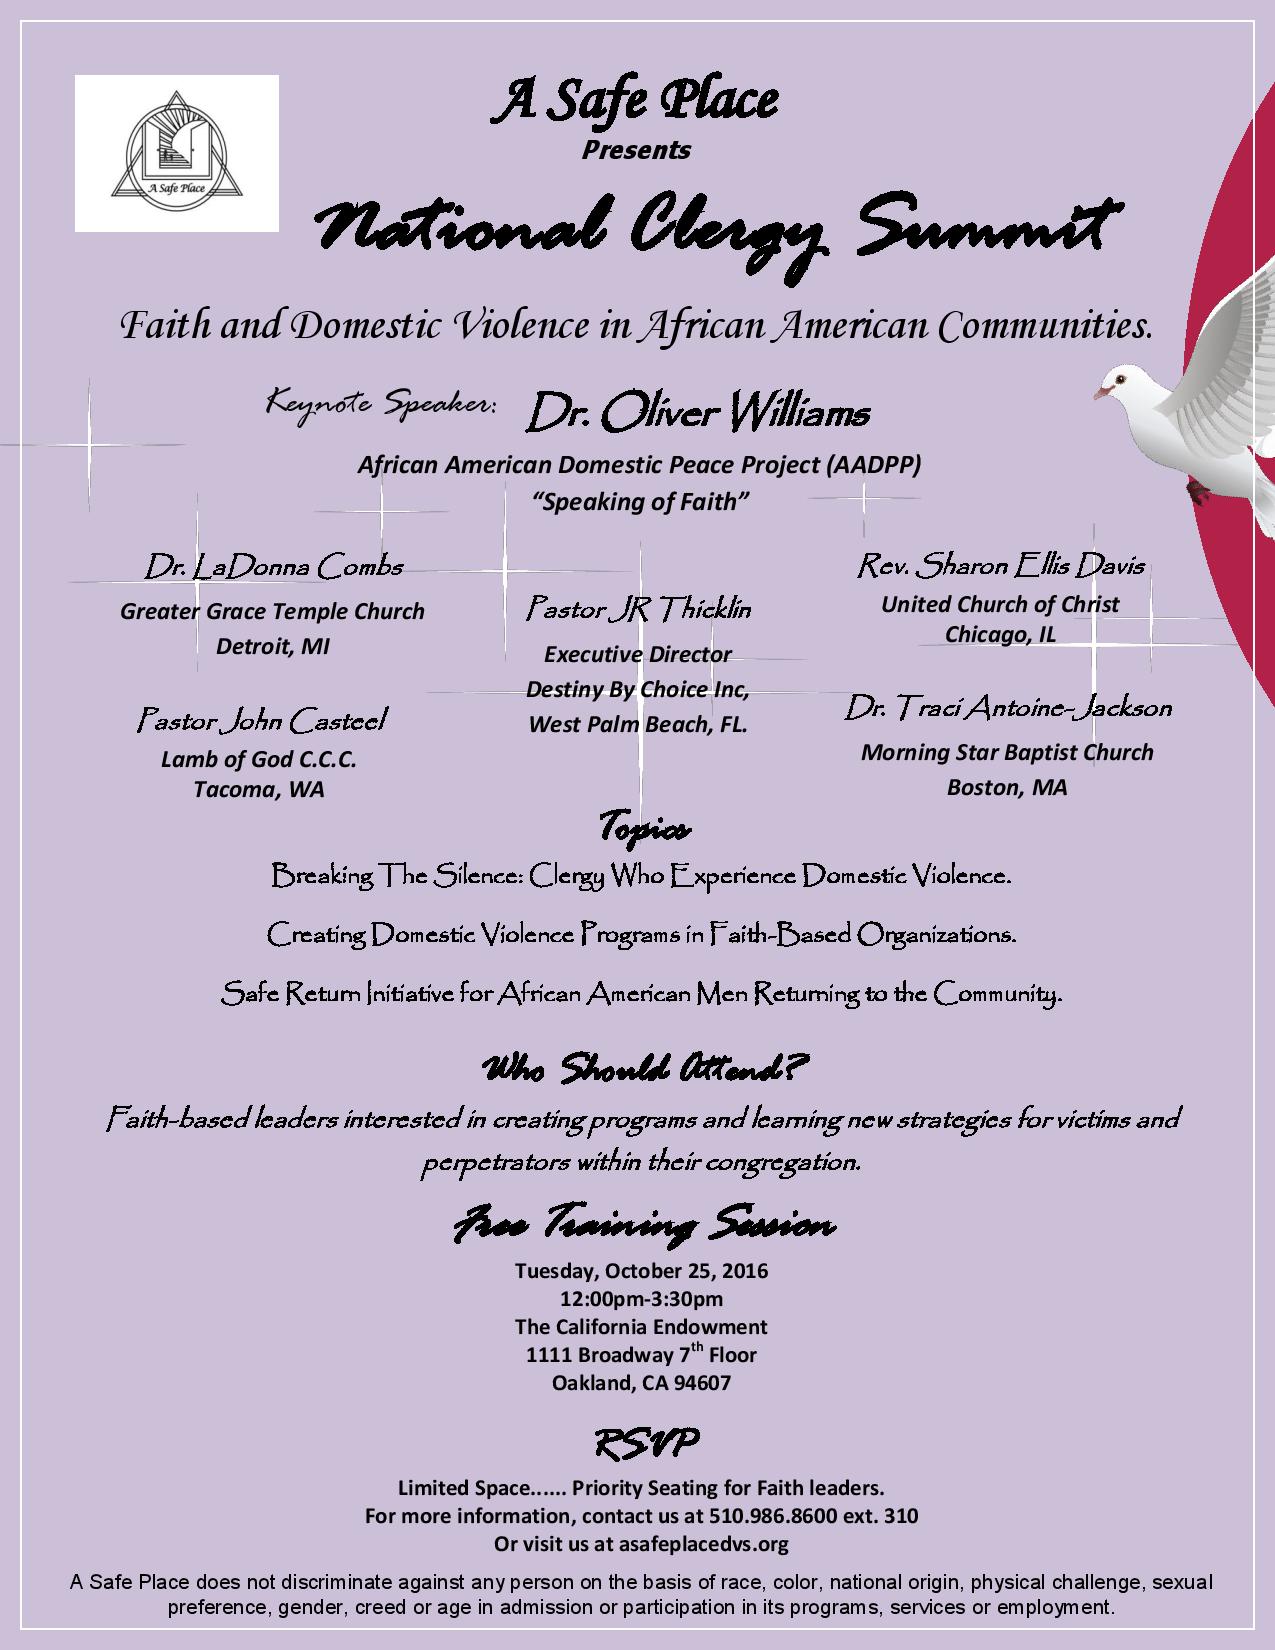 A Safe Place - National Clergy Summit